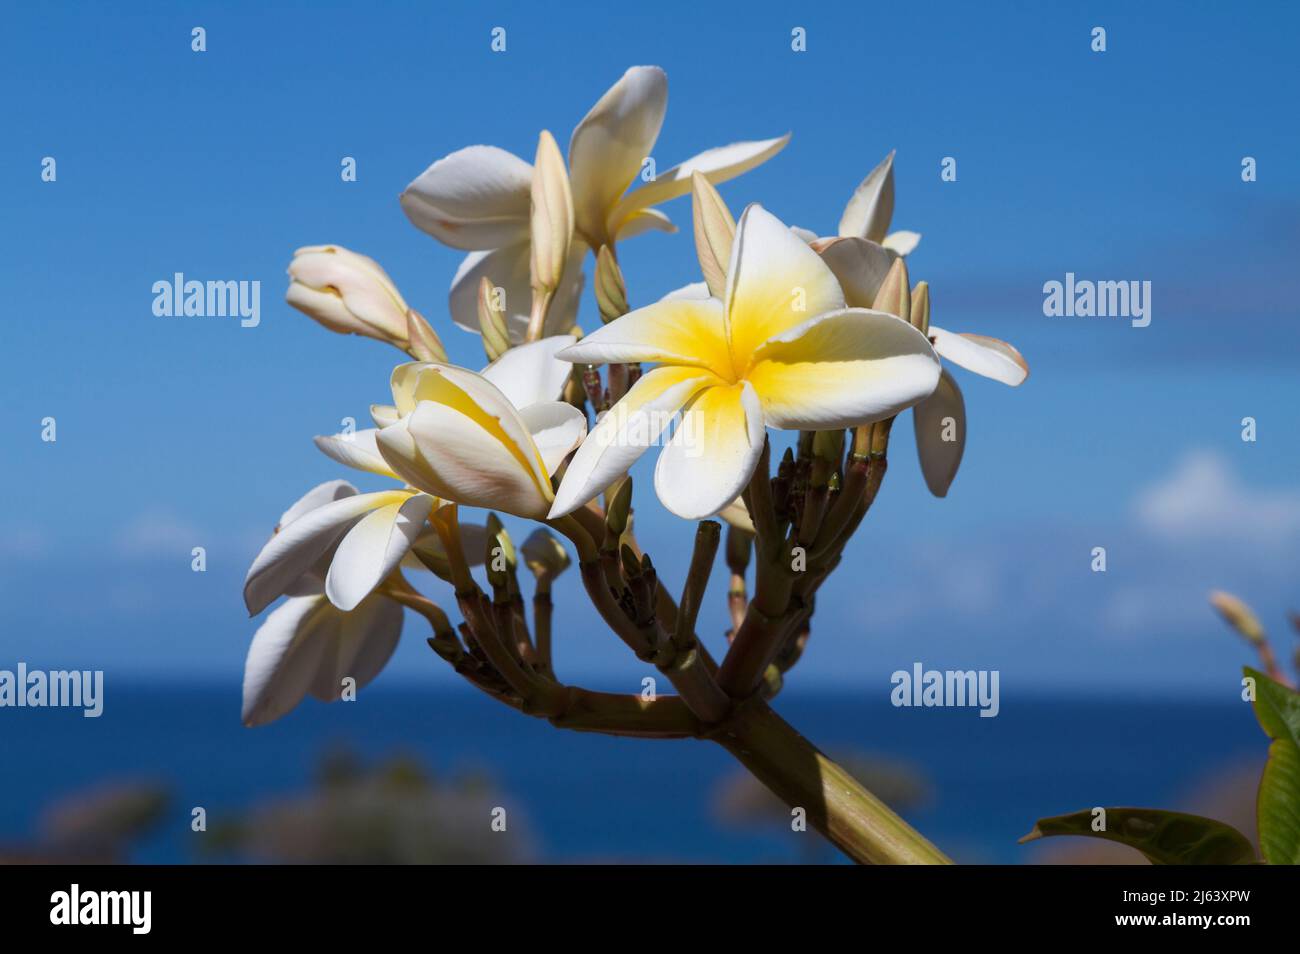 Closeup photograph of beautiful white and yellow plumeria flowers against a brilliant blue sky in Hawaii, USA, with the Pacific Ocean in background. Stock Photo